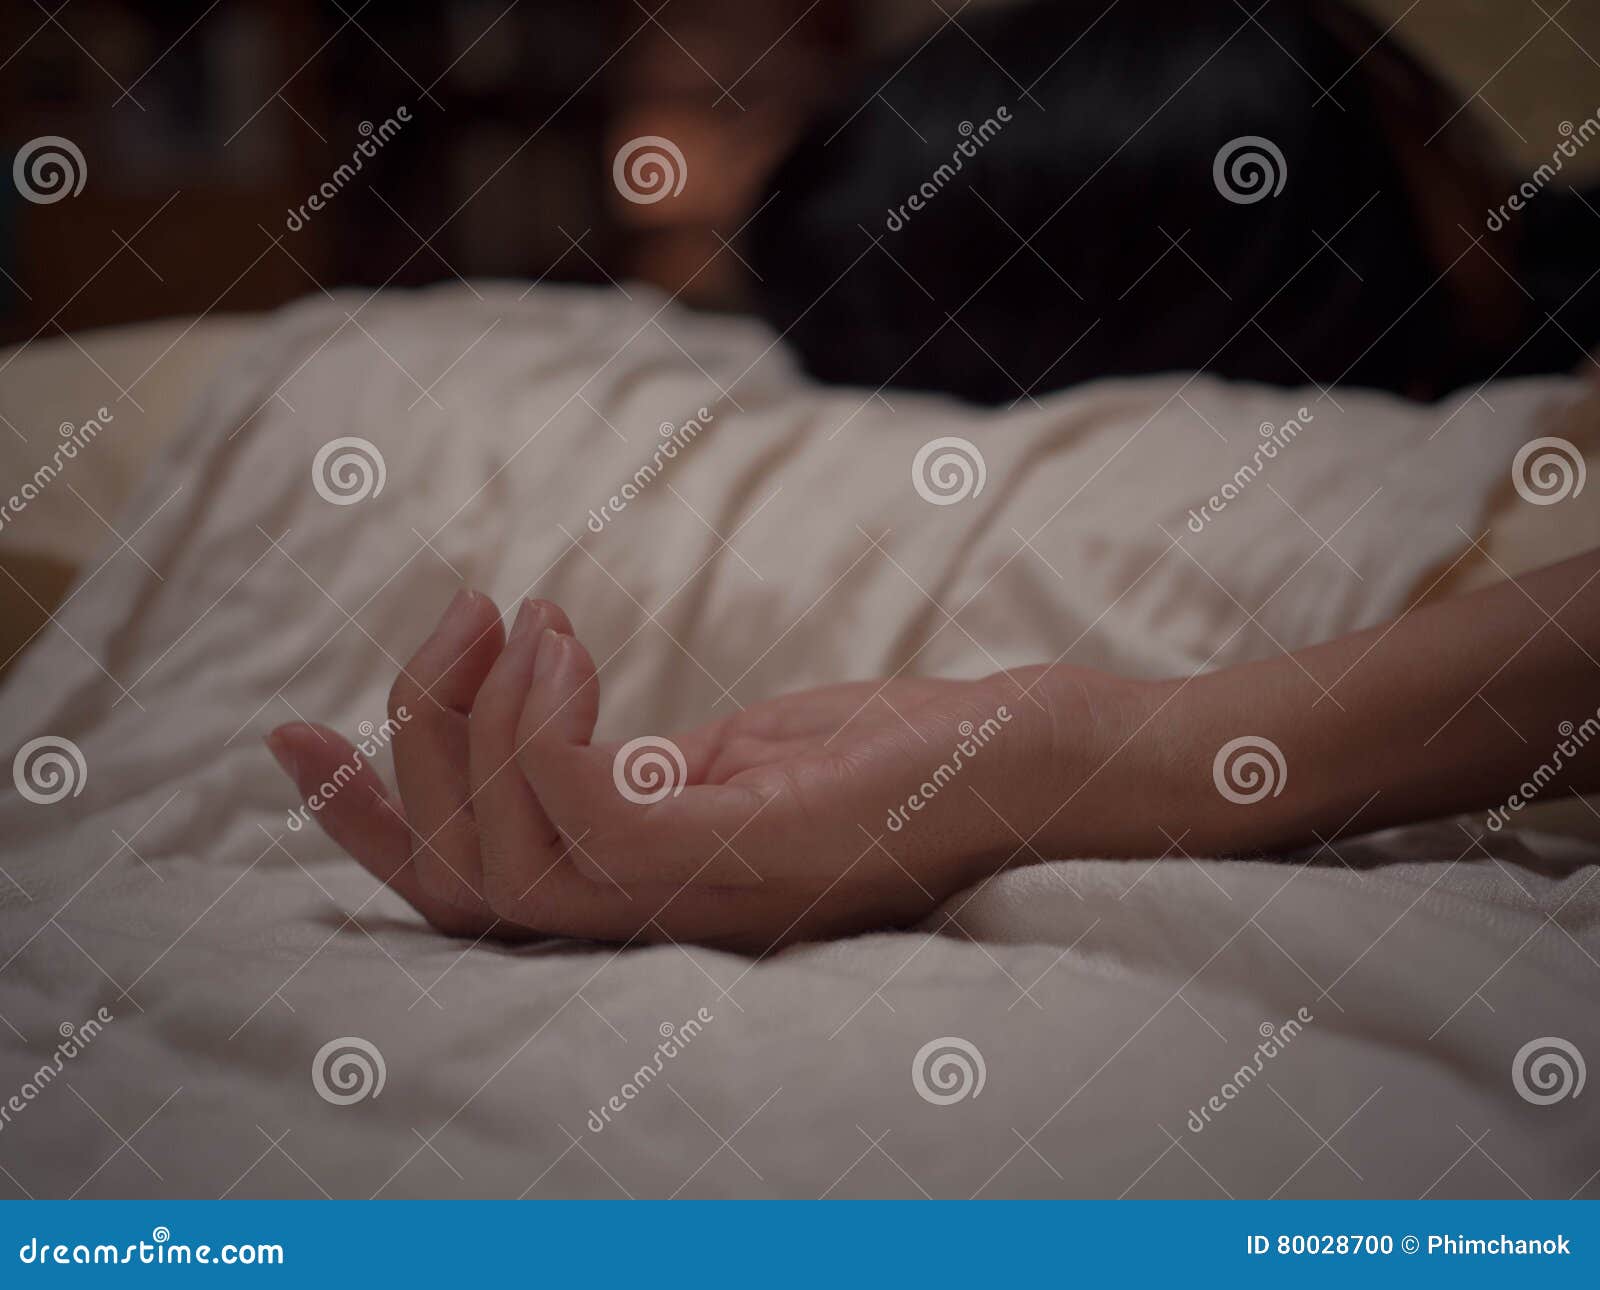 Hand of Women Having Sex on a Bed at Home Stock Photo